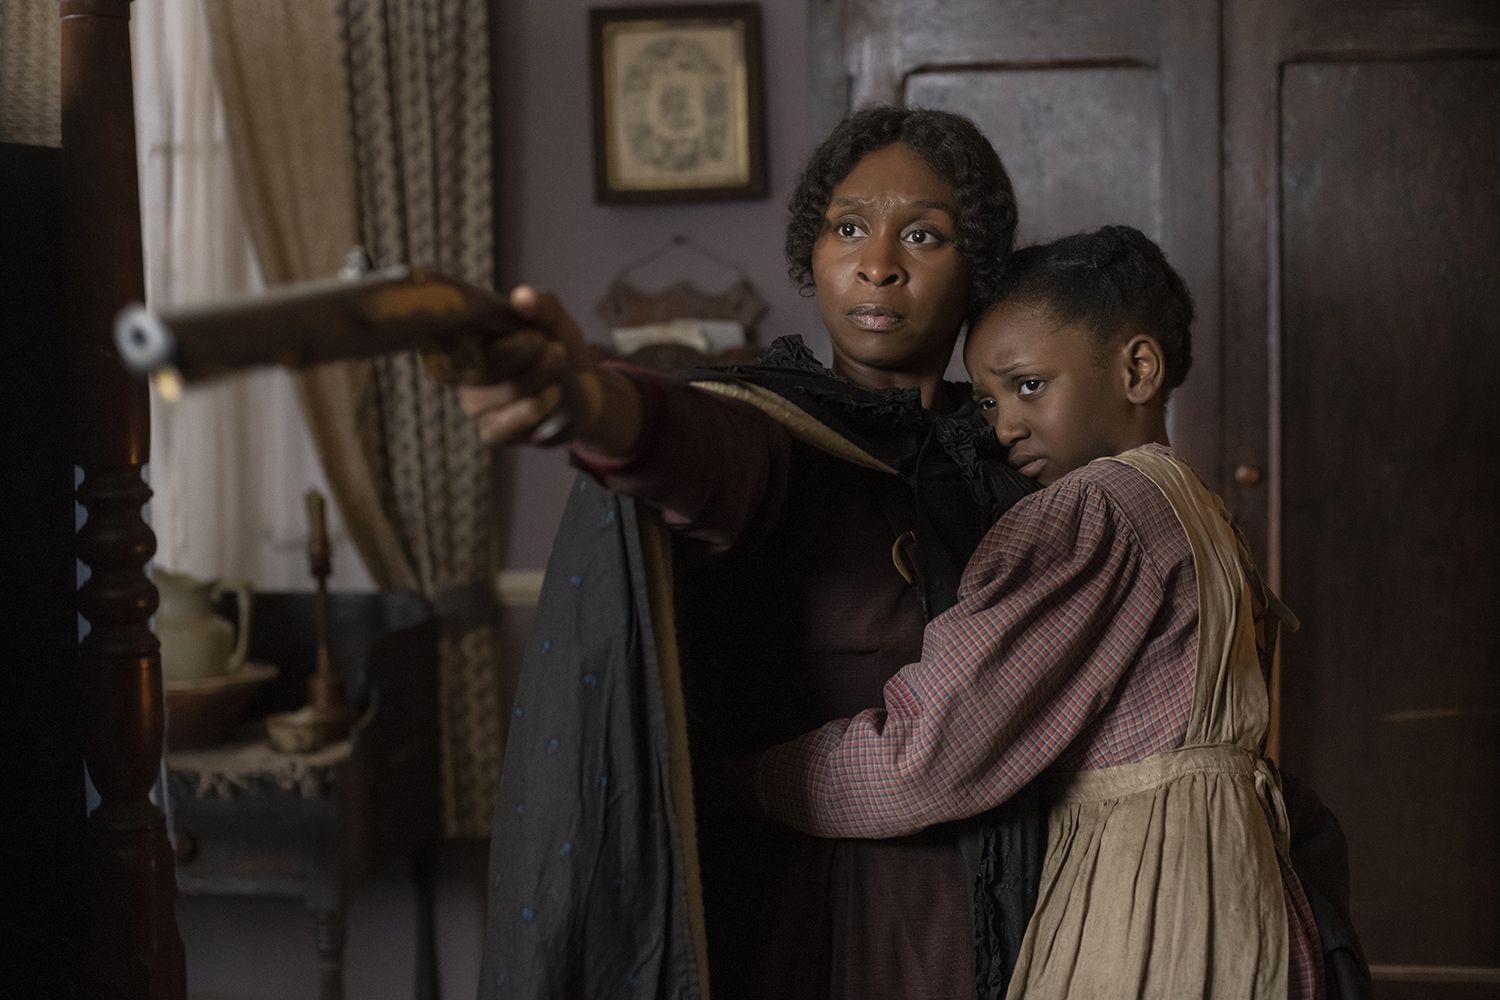 Who Is Cynthia Erivo? Facts About the Oscar-Nominated 'Harriet' Star